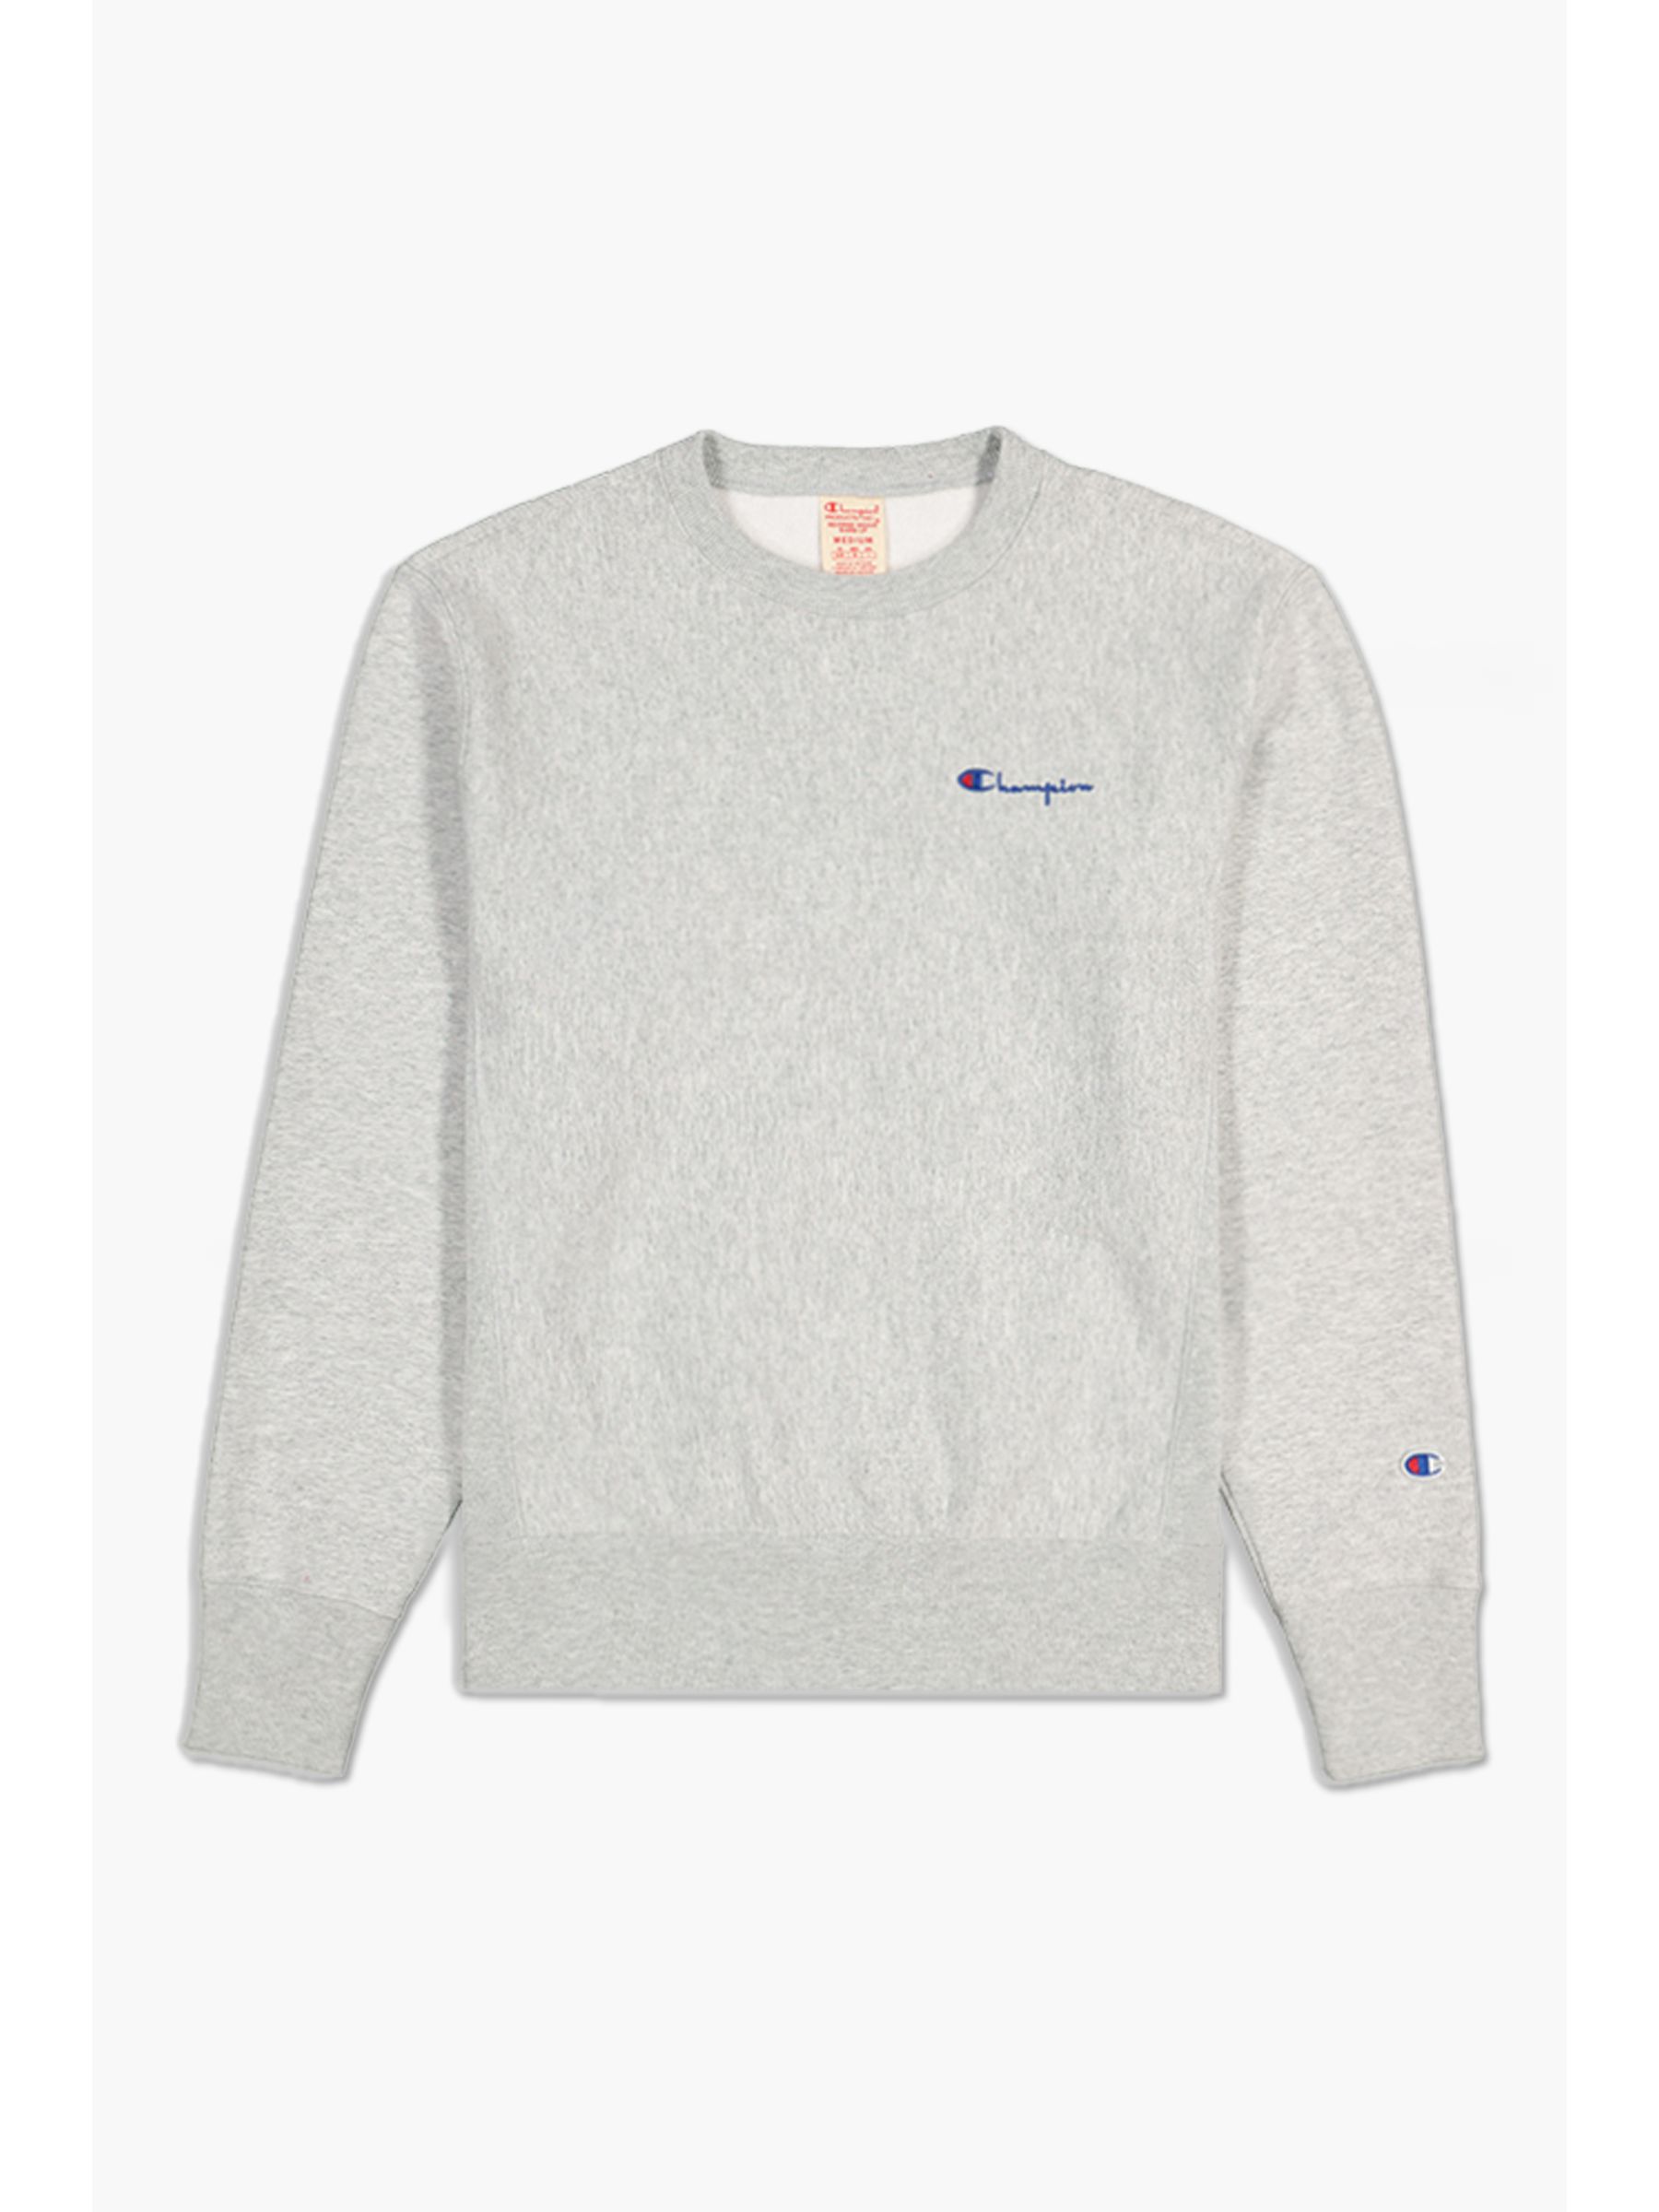 Champion_Reverse_Weave_Pullover_111289774_a.jpg